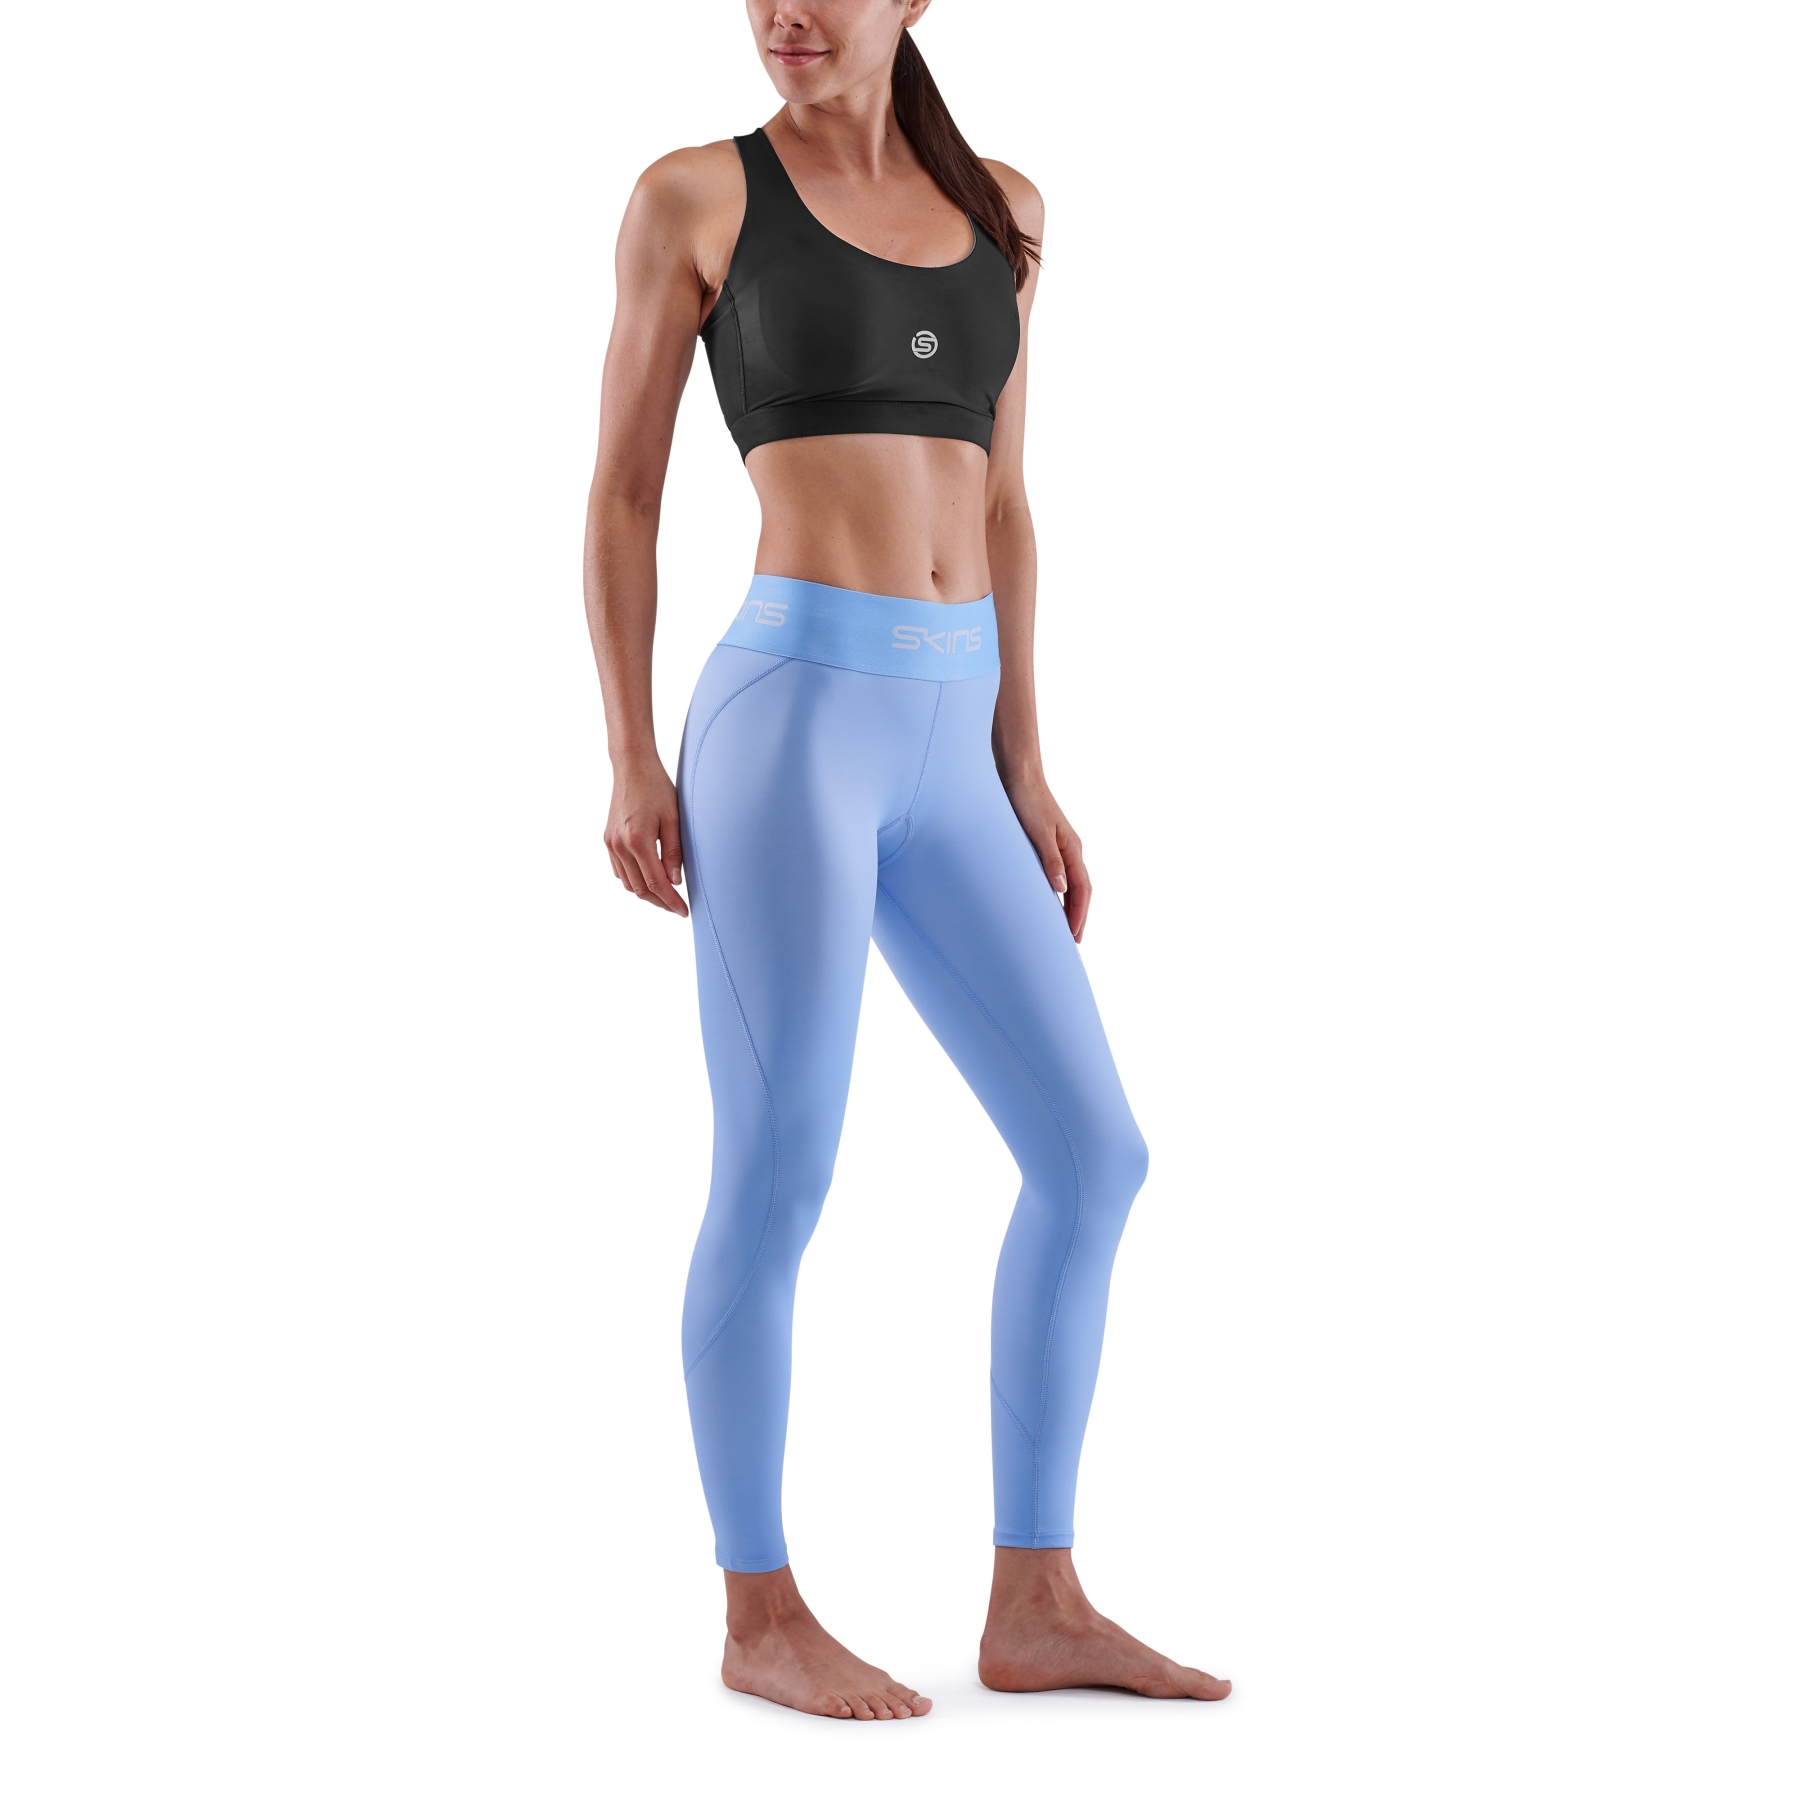 SKINS SERIES-1 WOMEN'S 7/8 TIGHTS BRIGHT BLUE - SKINS Compression UK